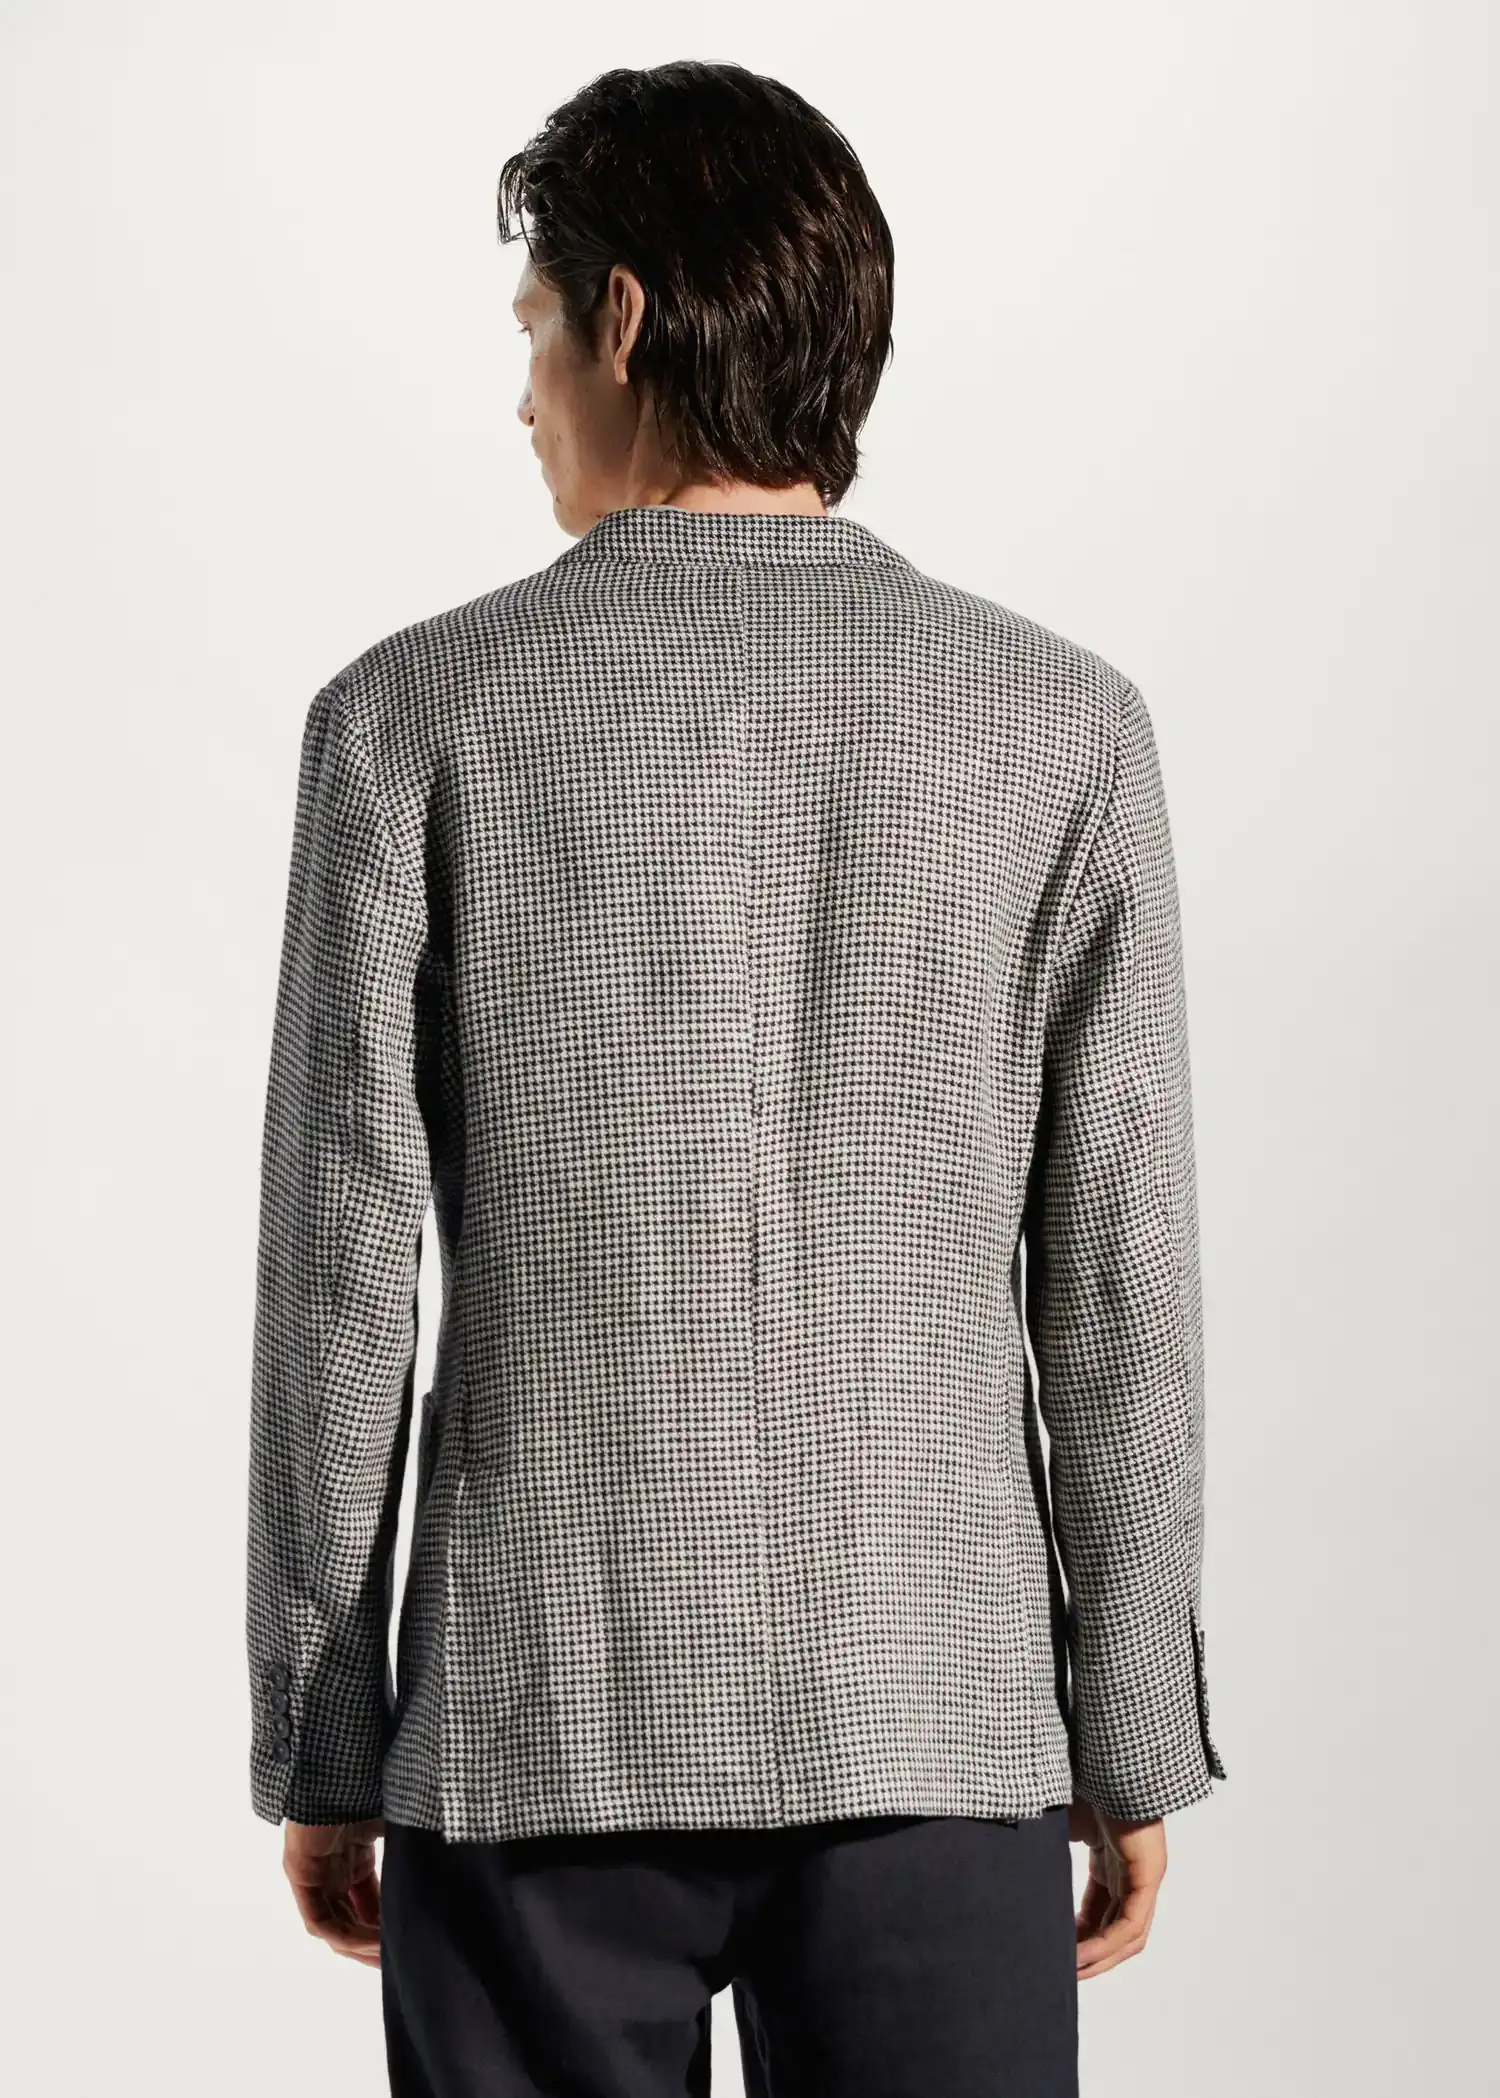 Mango 100% linen micro-houndstooth blazer. a man wearing a suit and a tie. 